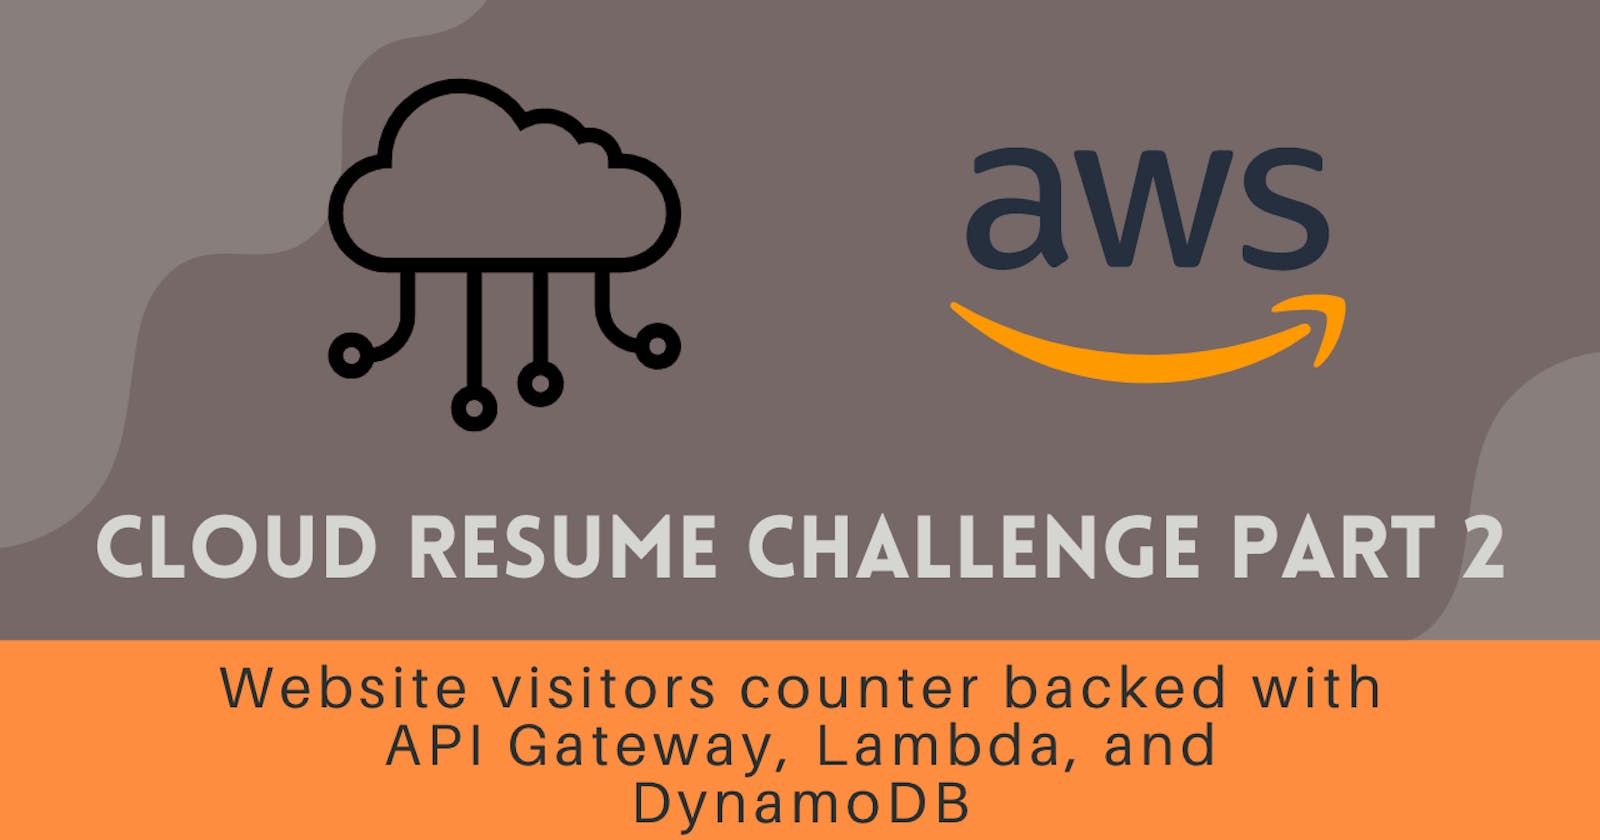 Cloud Resume Challenge Part 2 - Website visitors counter backed with API Gateway, Lambda, and DynamoDB